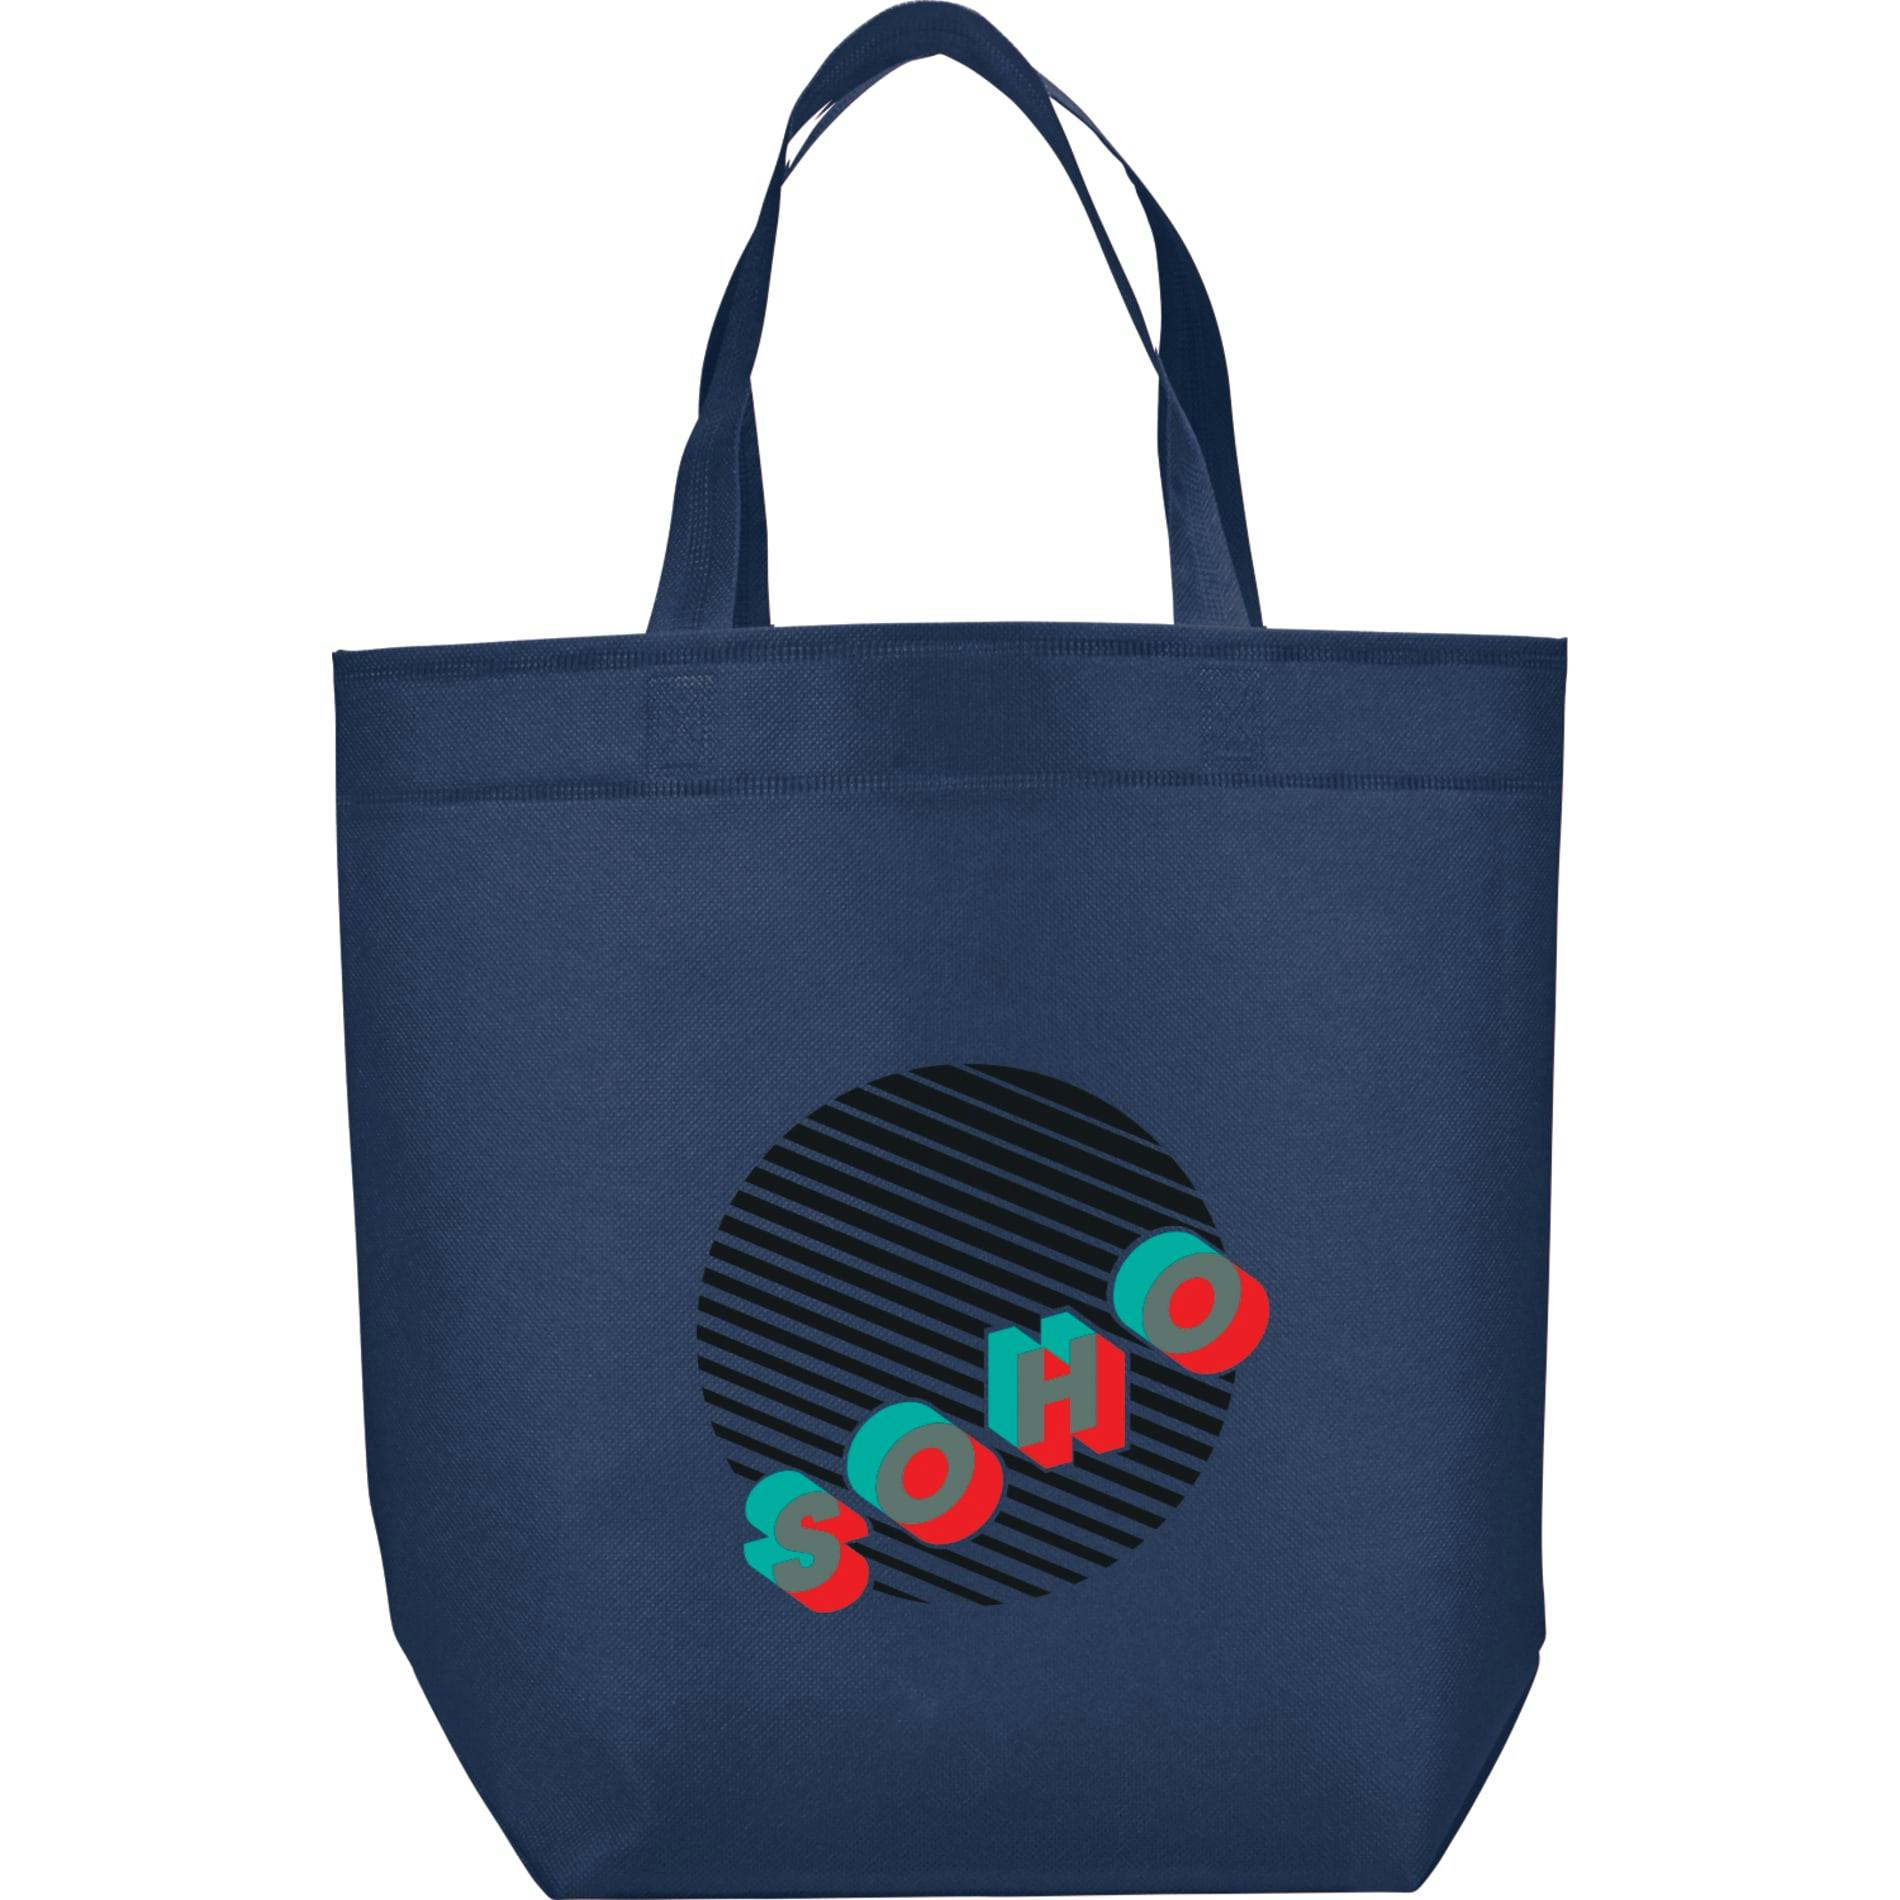 Challenger Non-Woven Shopper Tote - additional Image 3